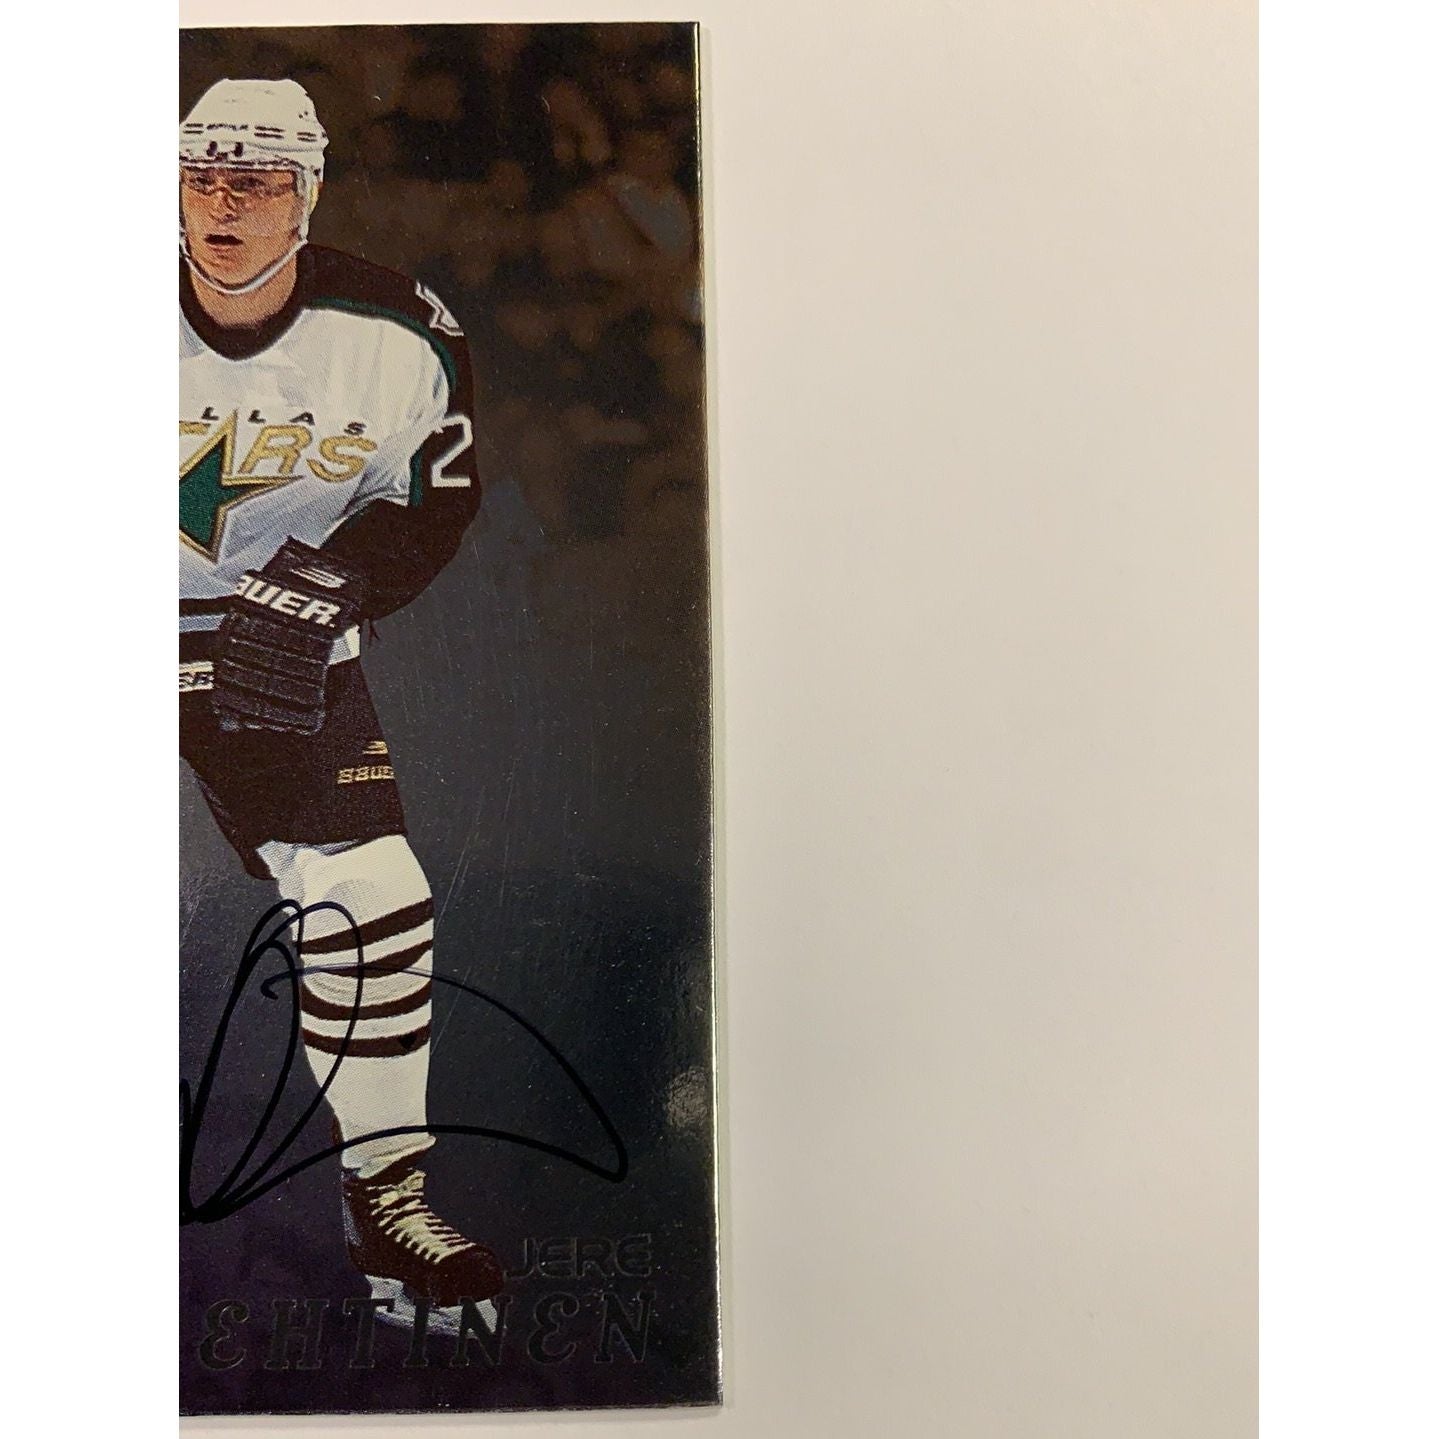  1998 ITG Be A Player Jere Lehtinen Auto  Local Legends Cards & Collectibles